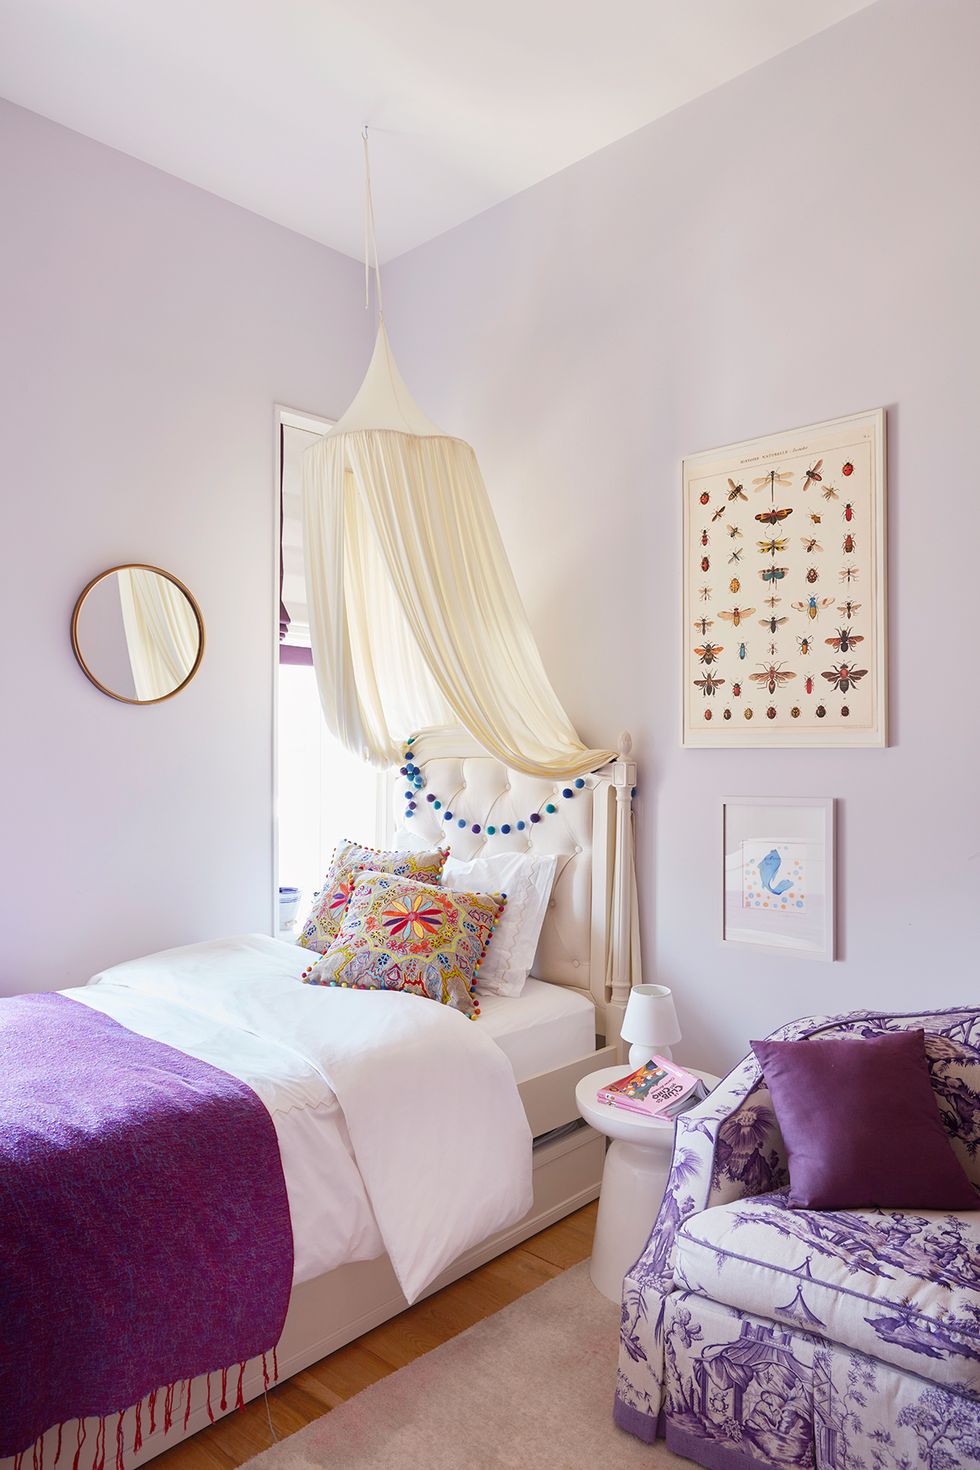 Toddler Pillows in Toddlers' Room Decor 